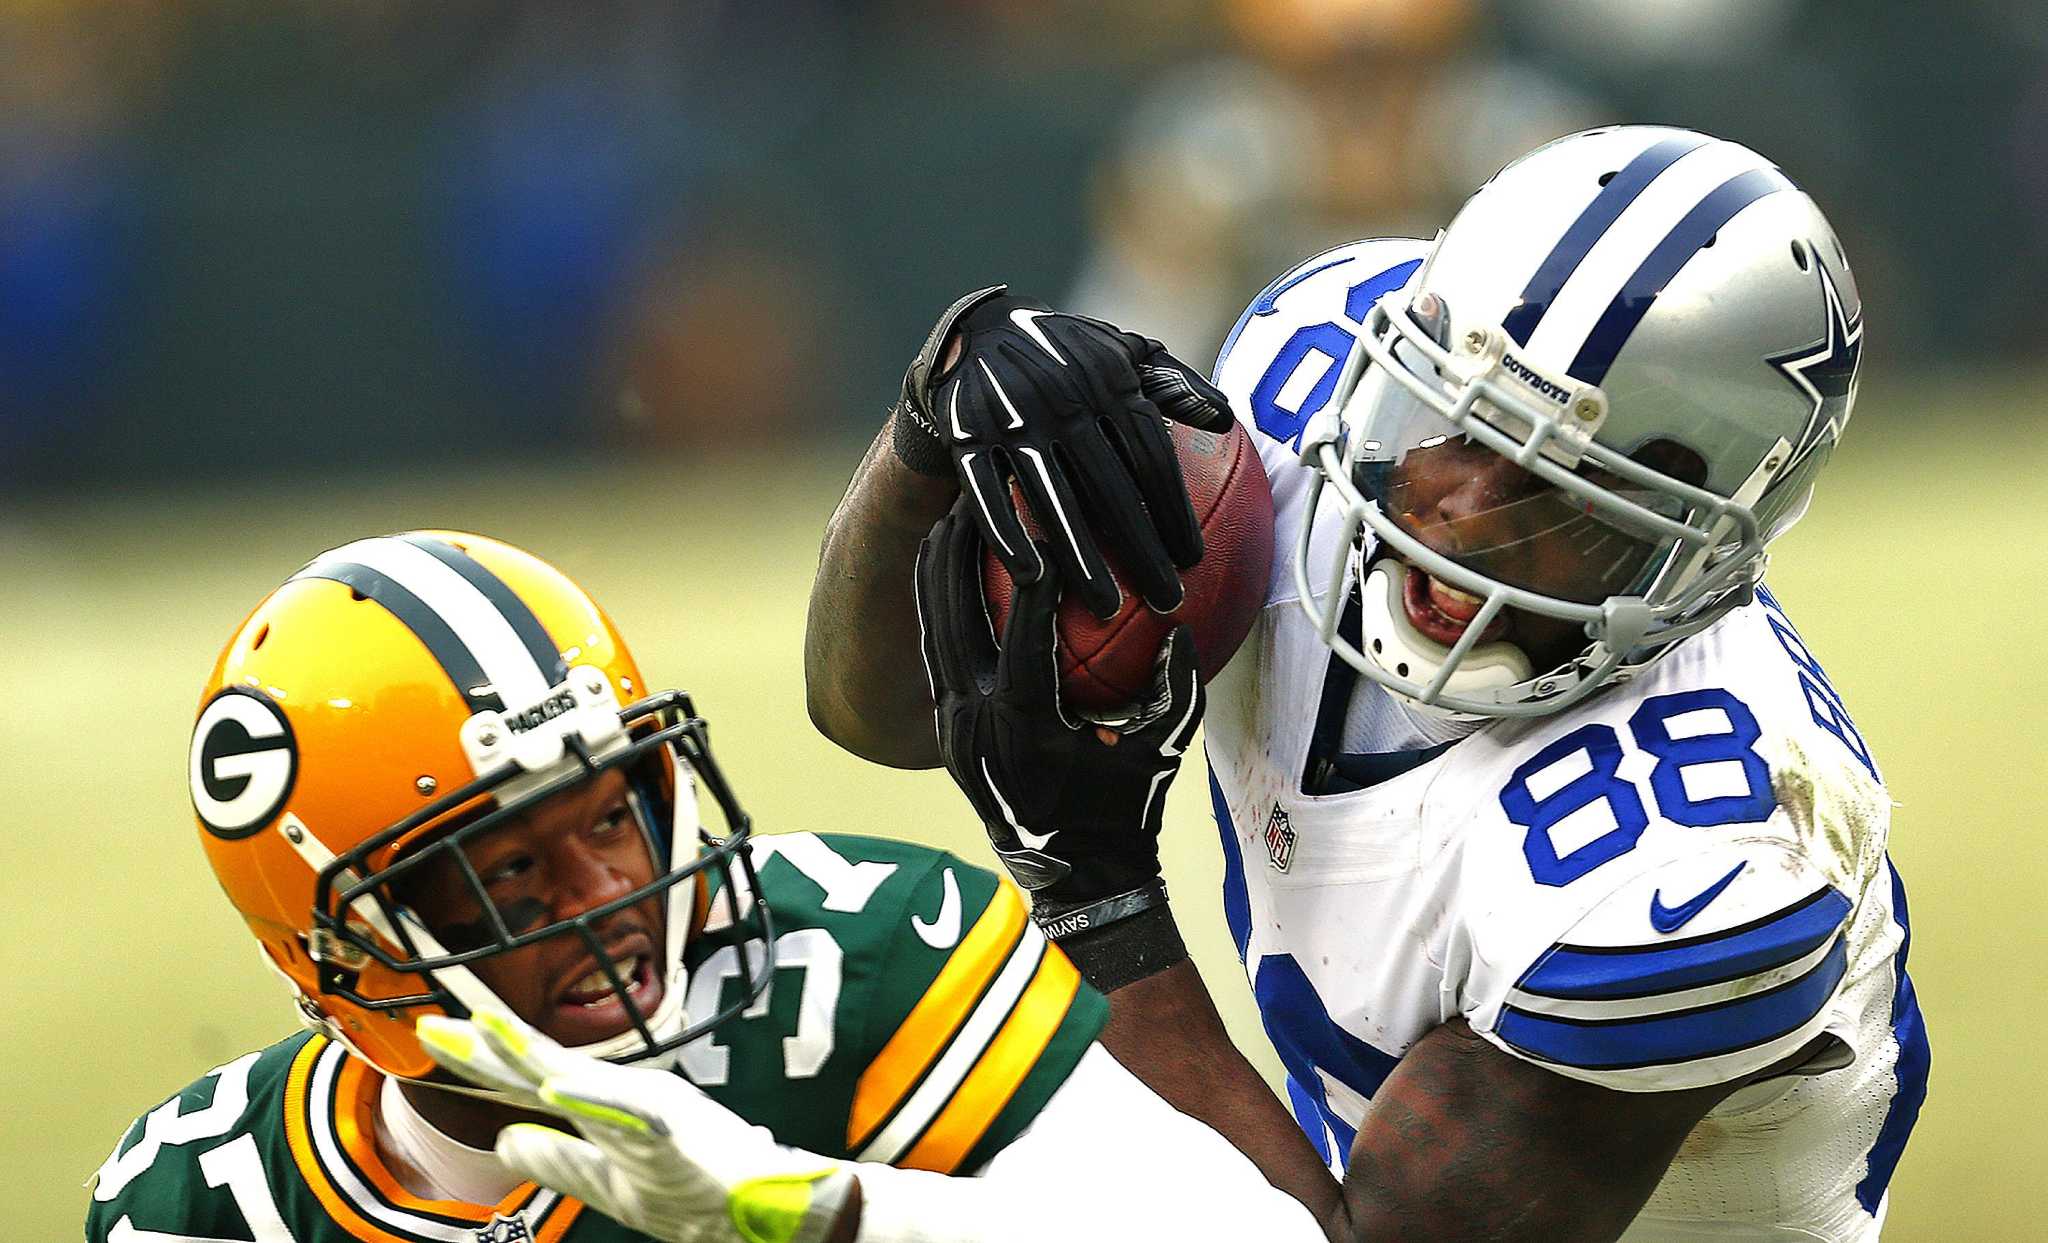 Dez Bryant attempts to make catch during 2015 divisional playoff game against the Green Bay Packers